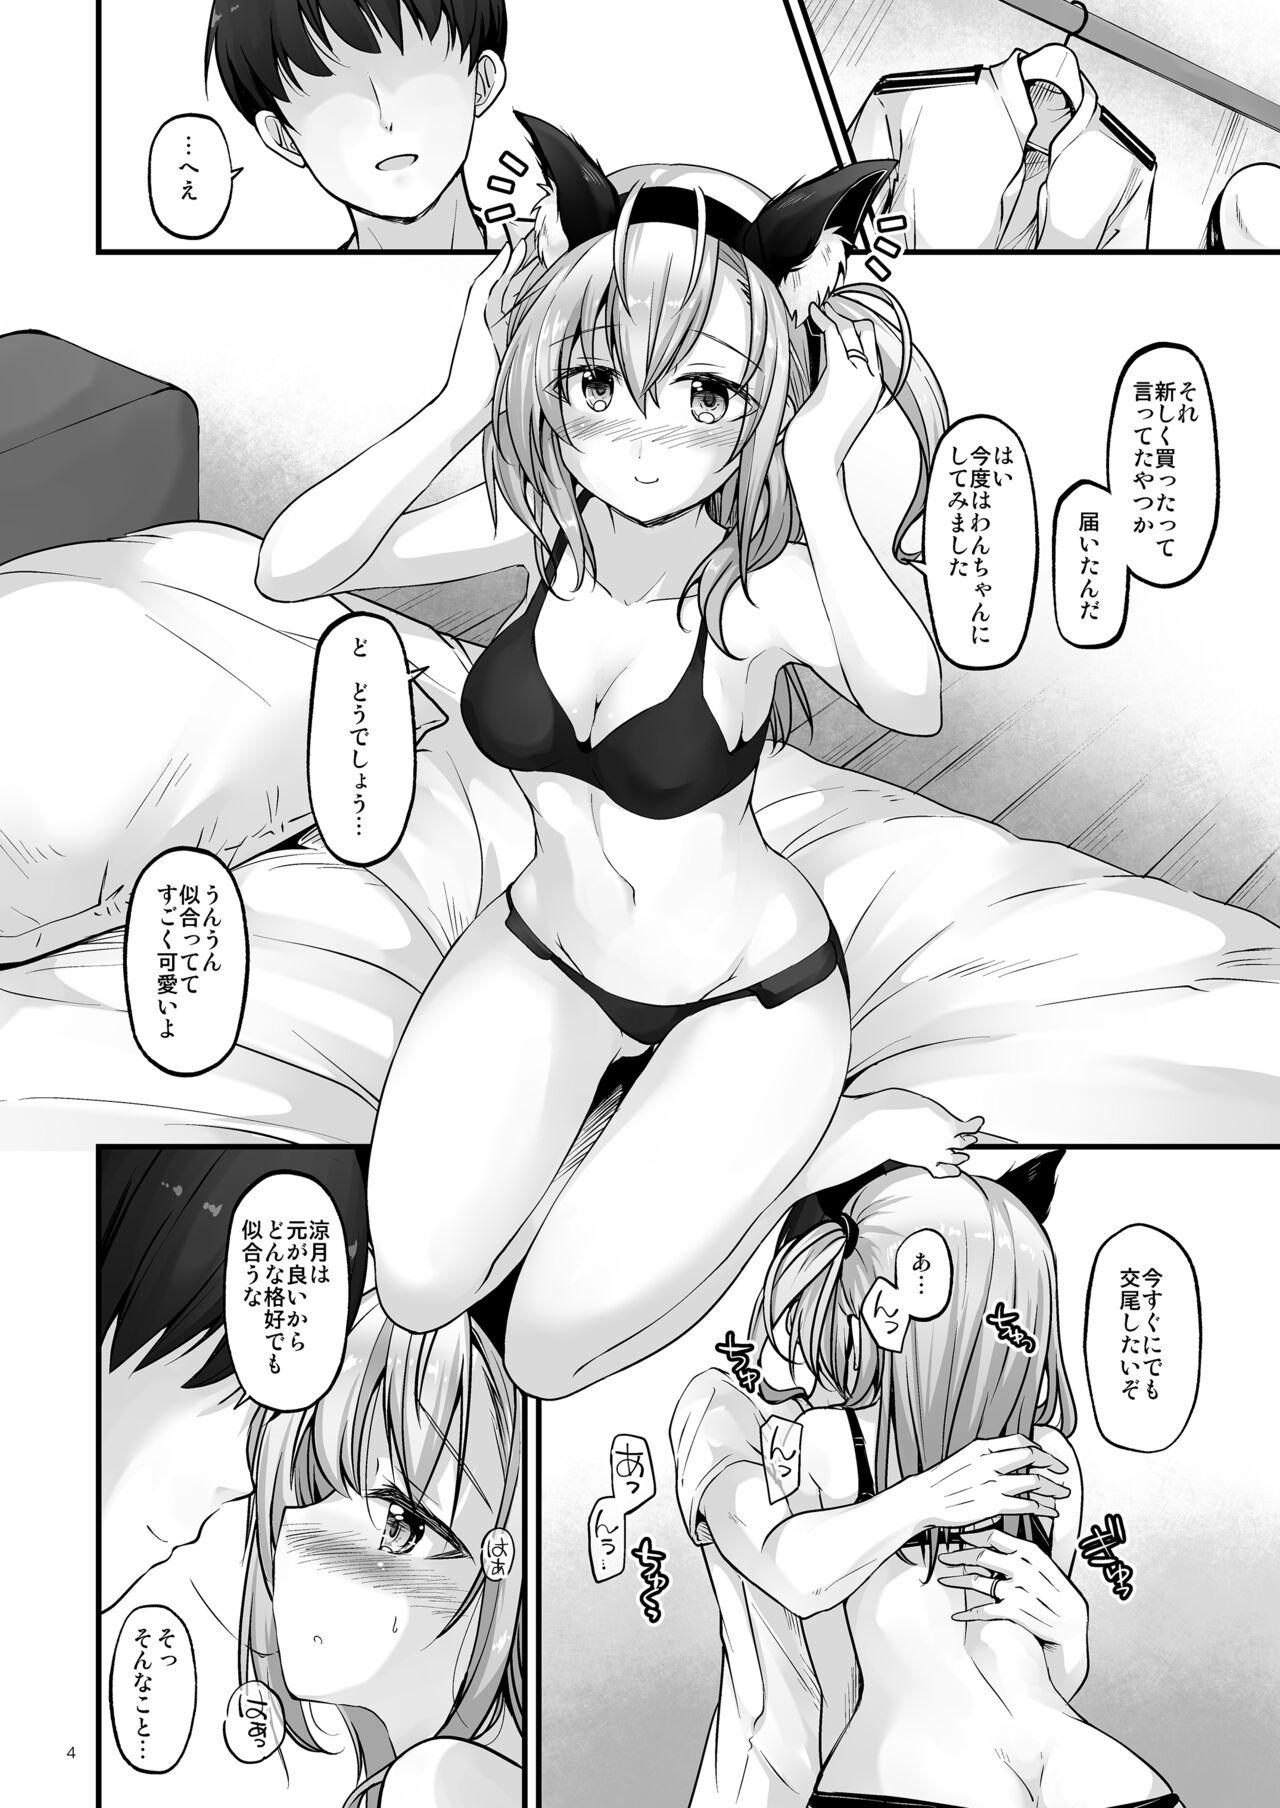 Moan Howling Moon - Kantai collection Teenxxx - Page 4